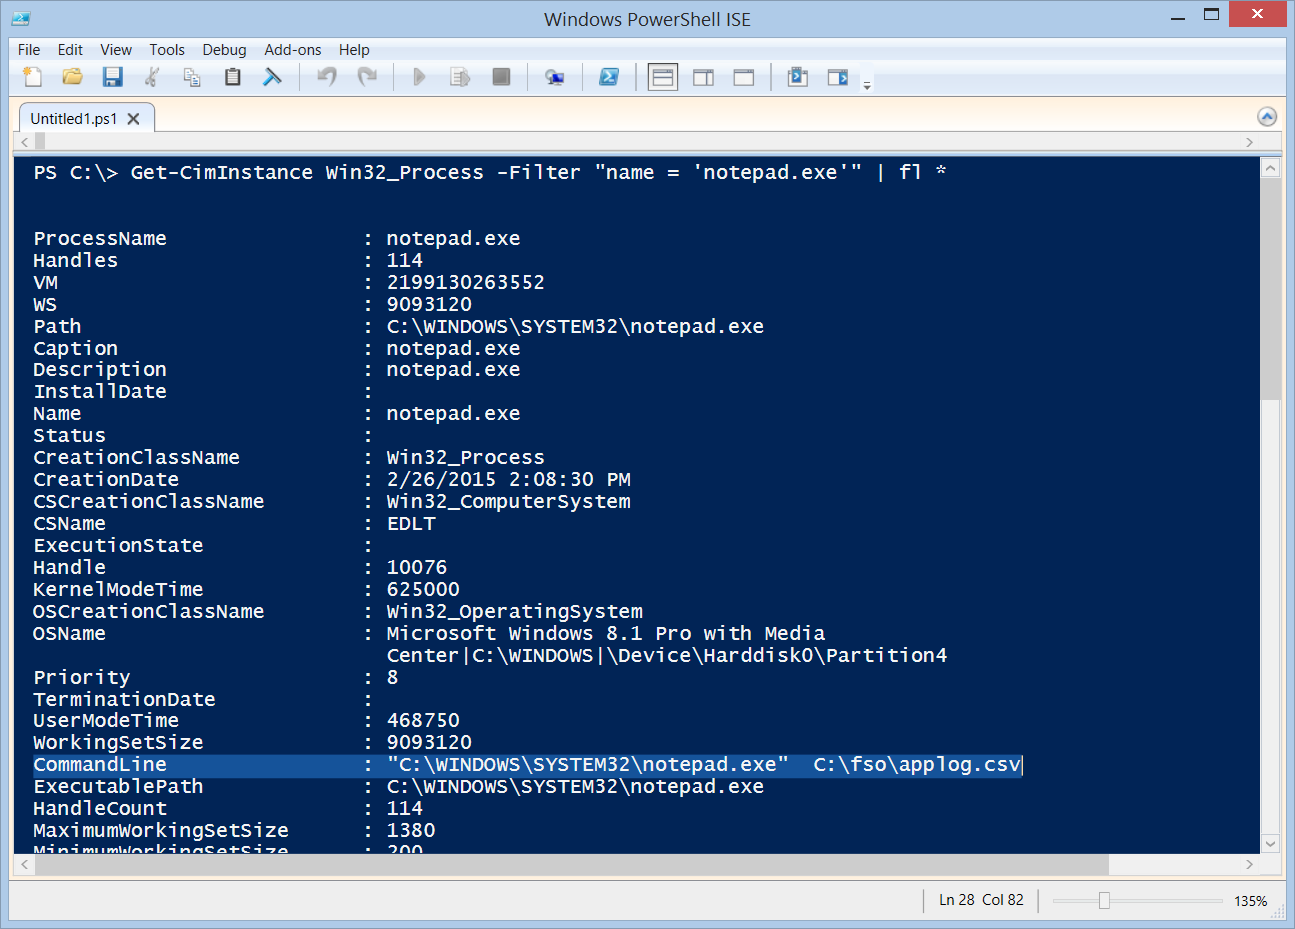 Complete wmi query guide with wmi explorer, powershell, cmd